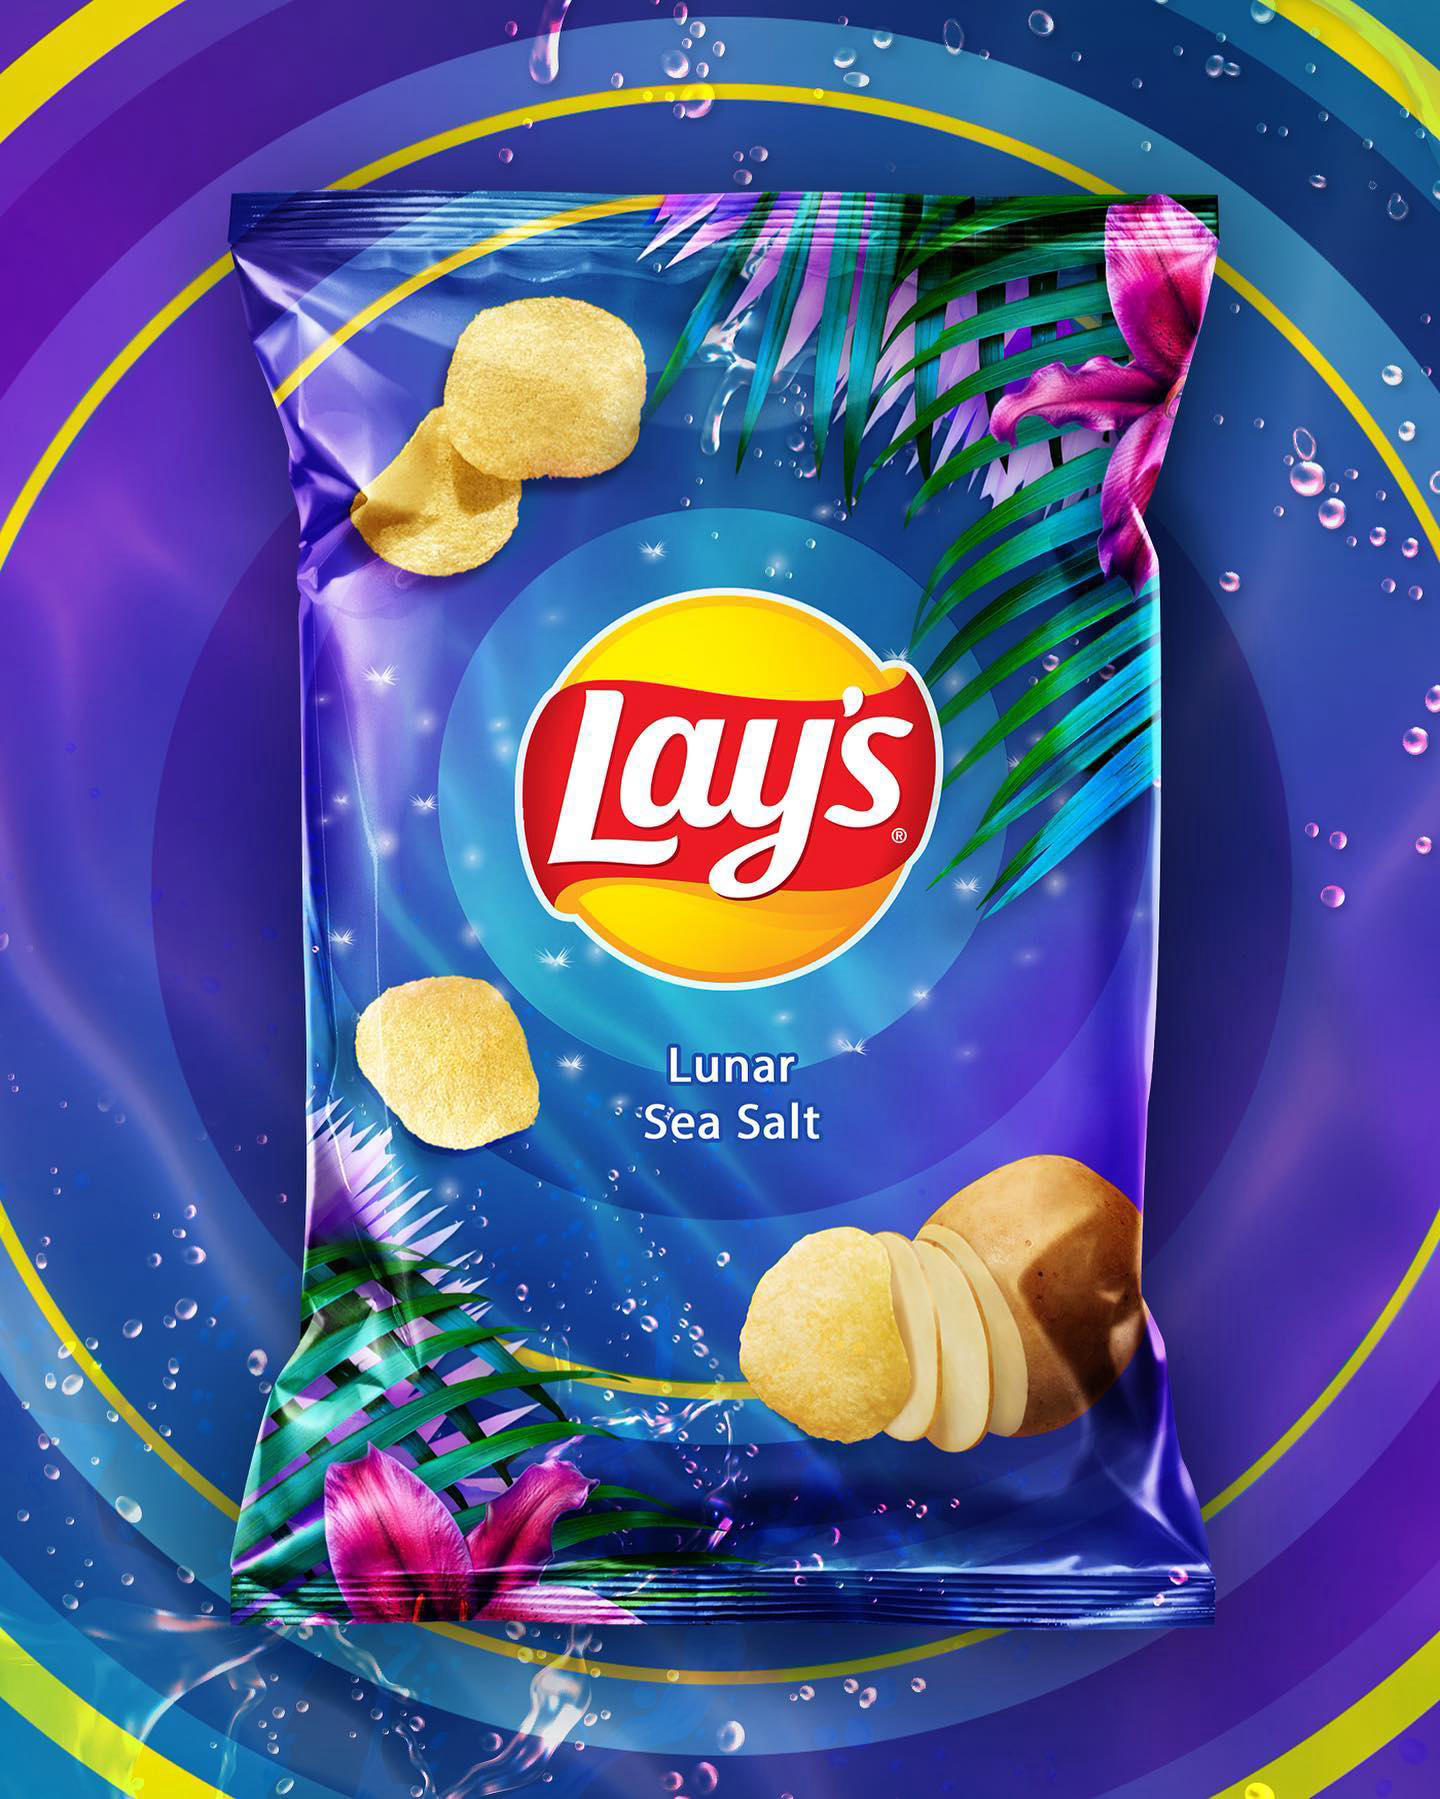 Lay's - This fake flavor has been bringing families together since 2009